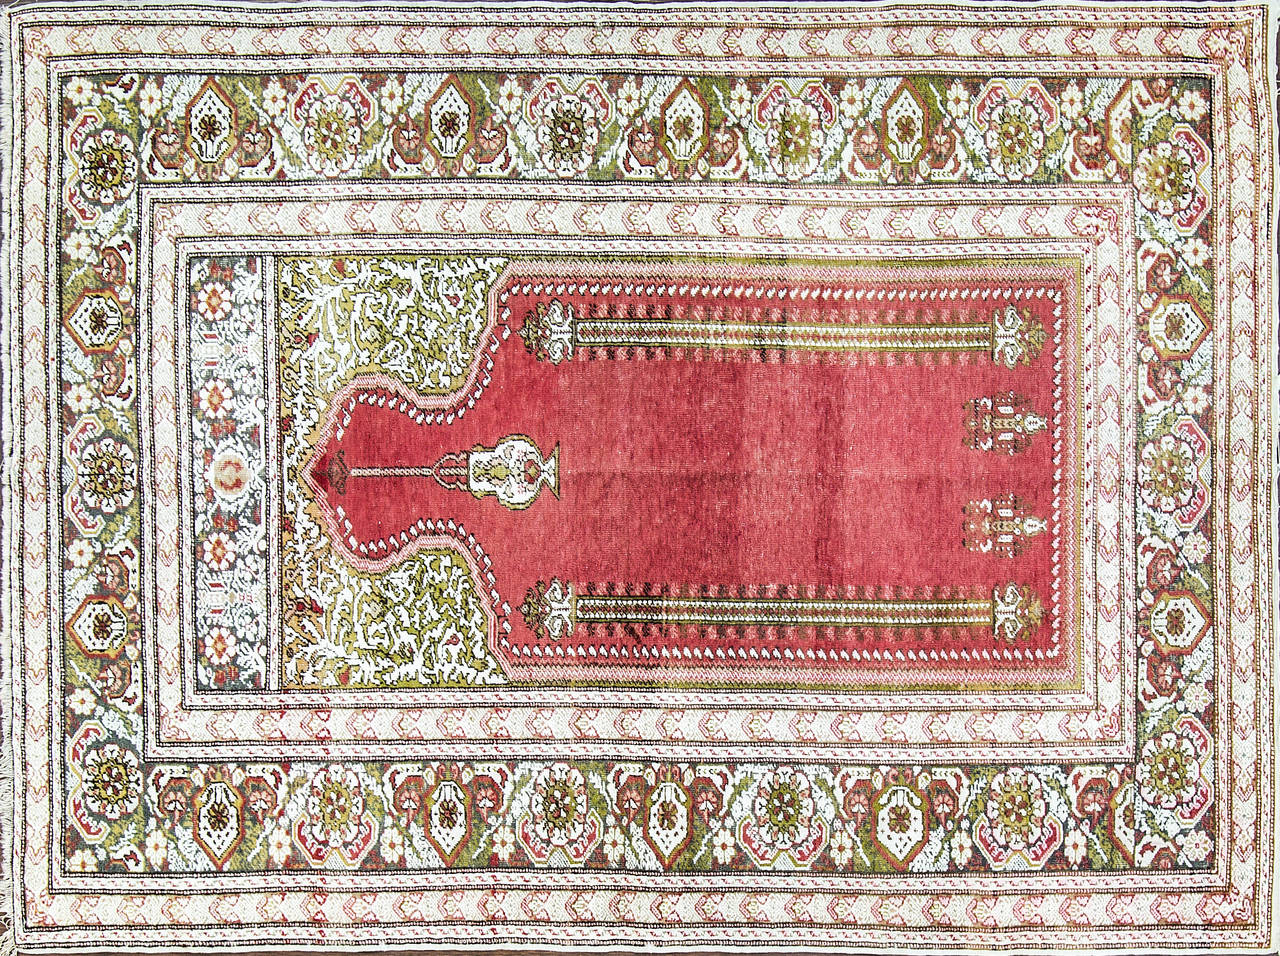 Antique silk Turkish rug, Turkey, early 20th century. This outstanding silk Turkish rug reflects incredible care and attention to fine detail in its design and composition. Red, brilliant green, yellow, ivory colors permeate the visual imagery